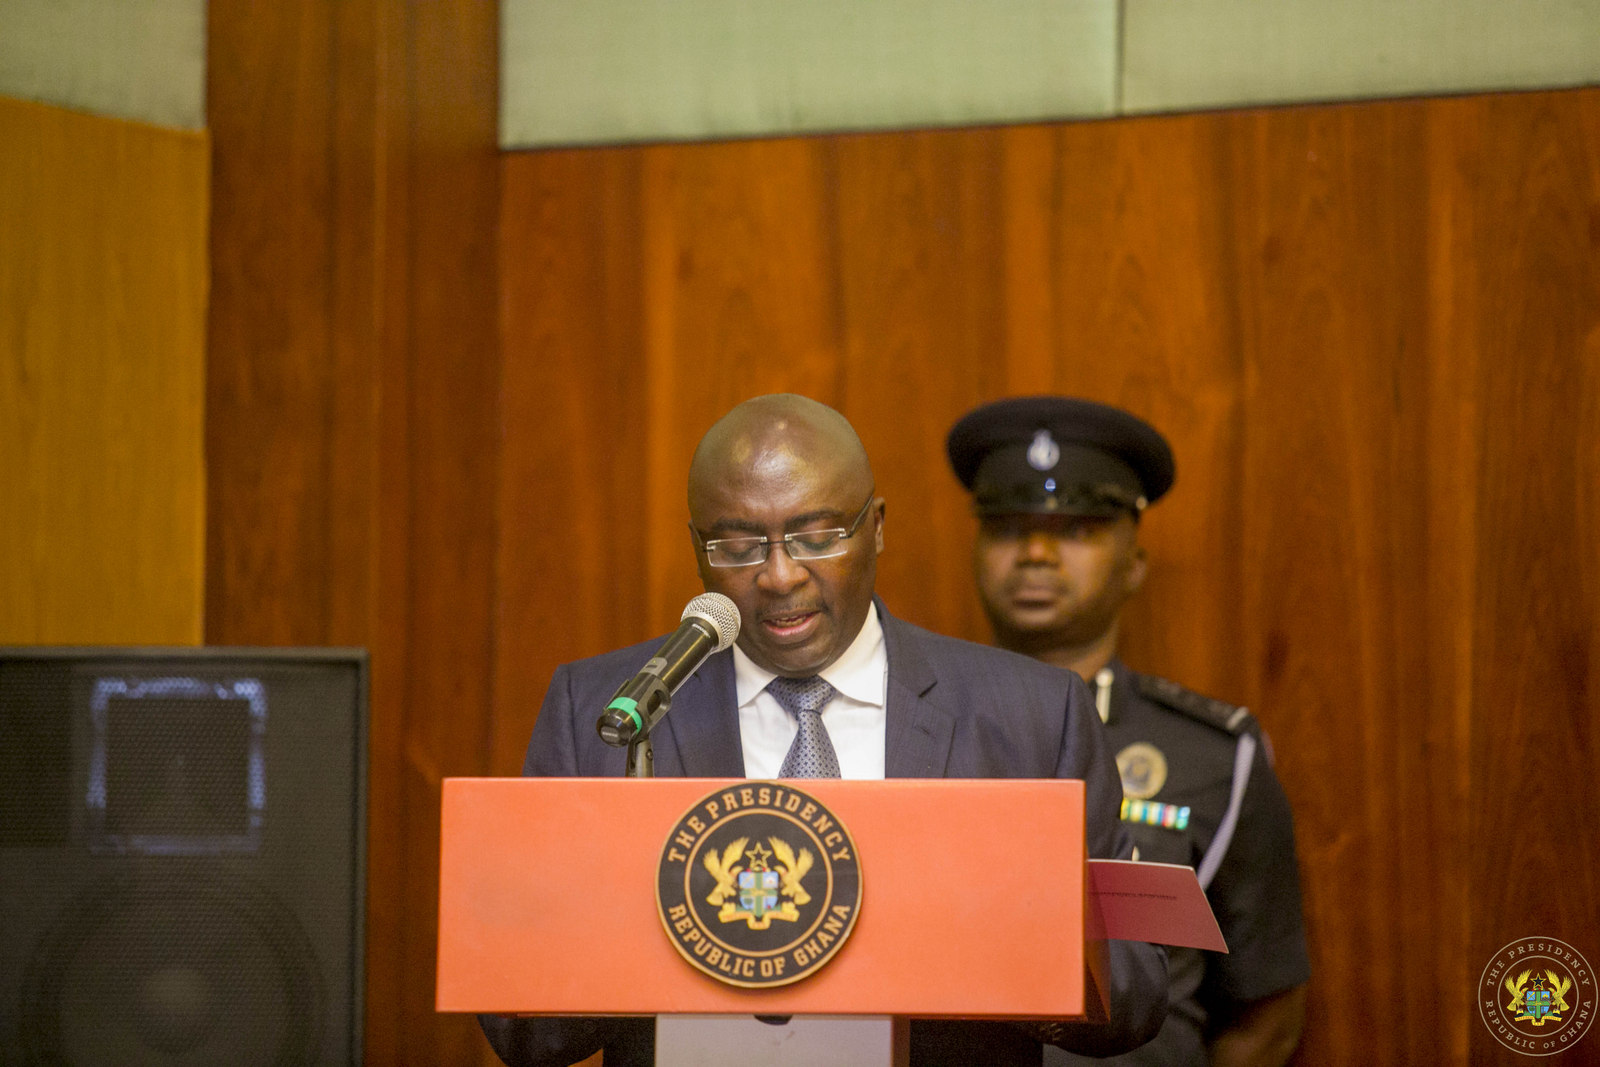 vice-president-delivering-his-speech-on-behalf-of-the-members-of-the-council